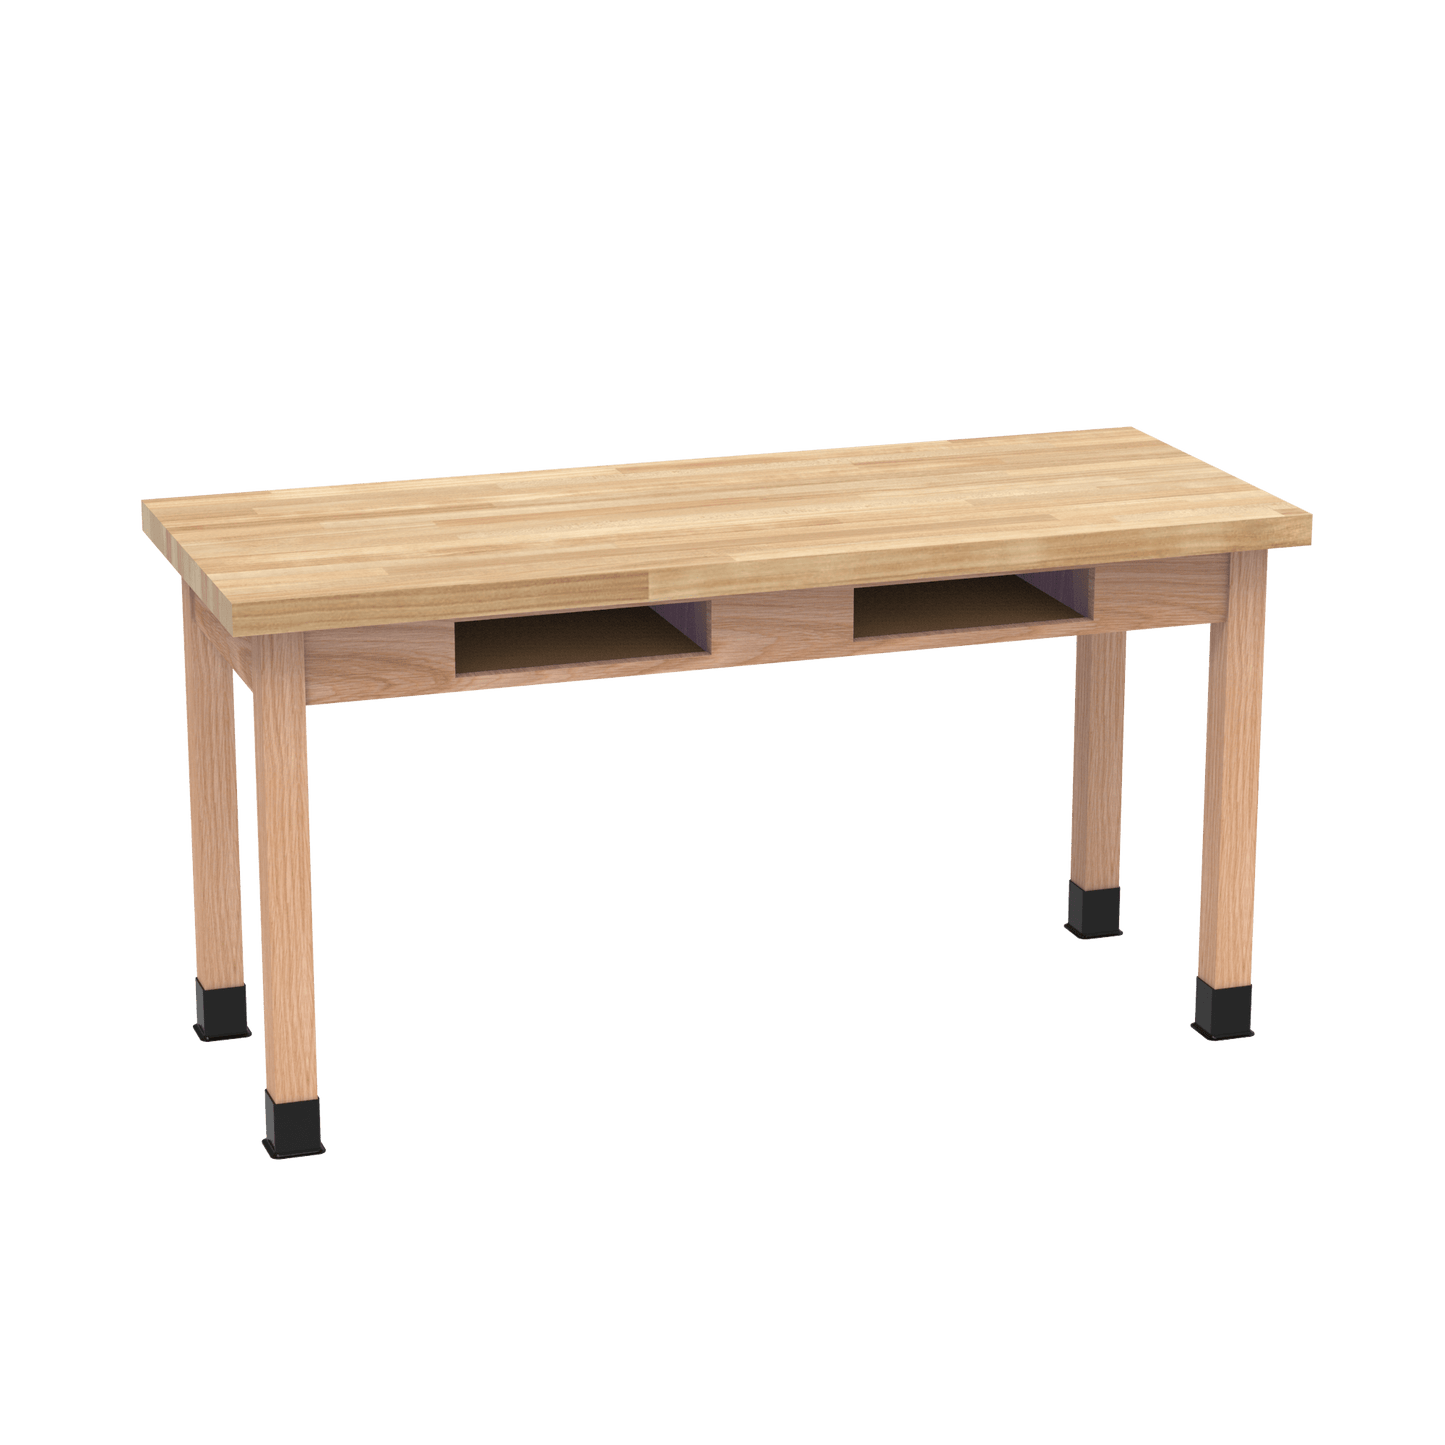 Diversified Woodcrafts Science Table w/ Book Compartment - 60" W x 21" D - Solid Oak Frame and Adjustable Glides - SchoolOutlet